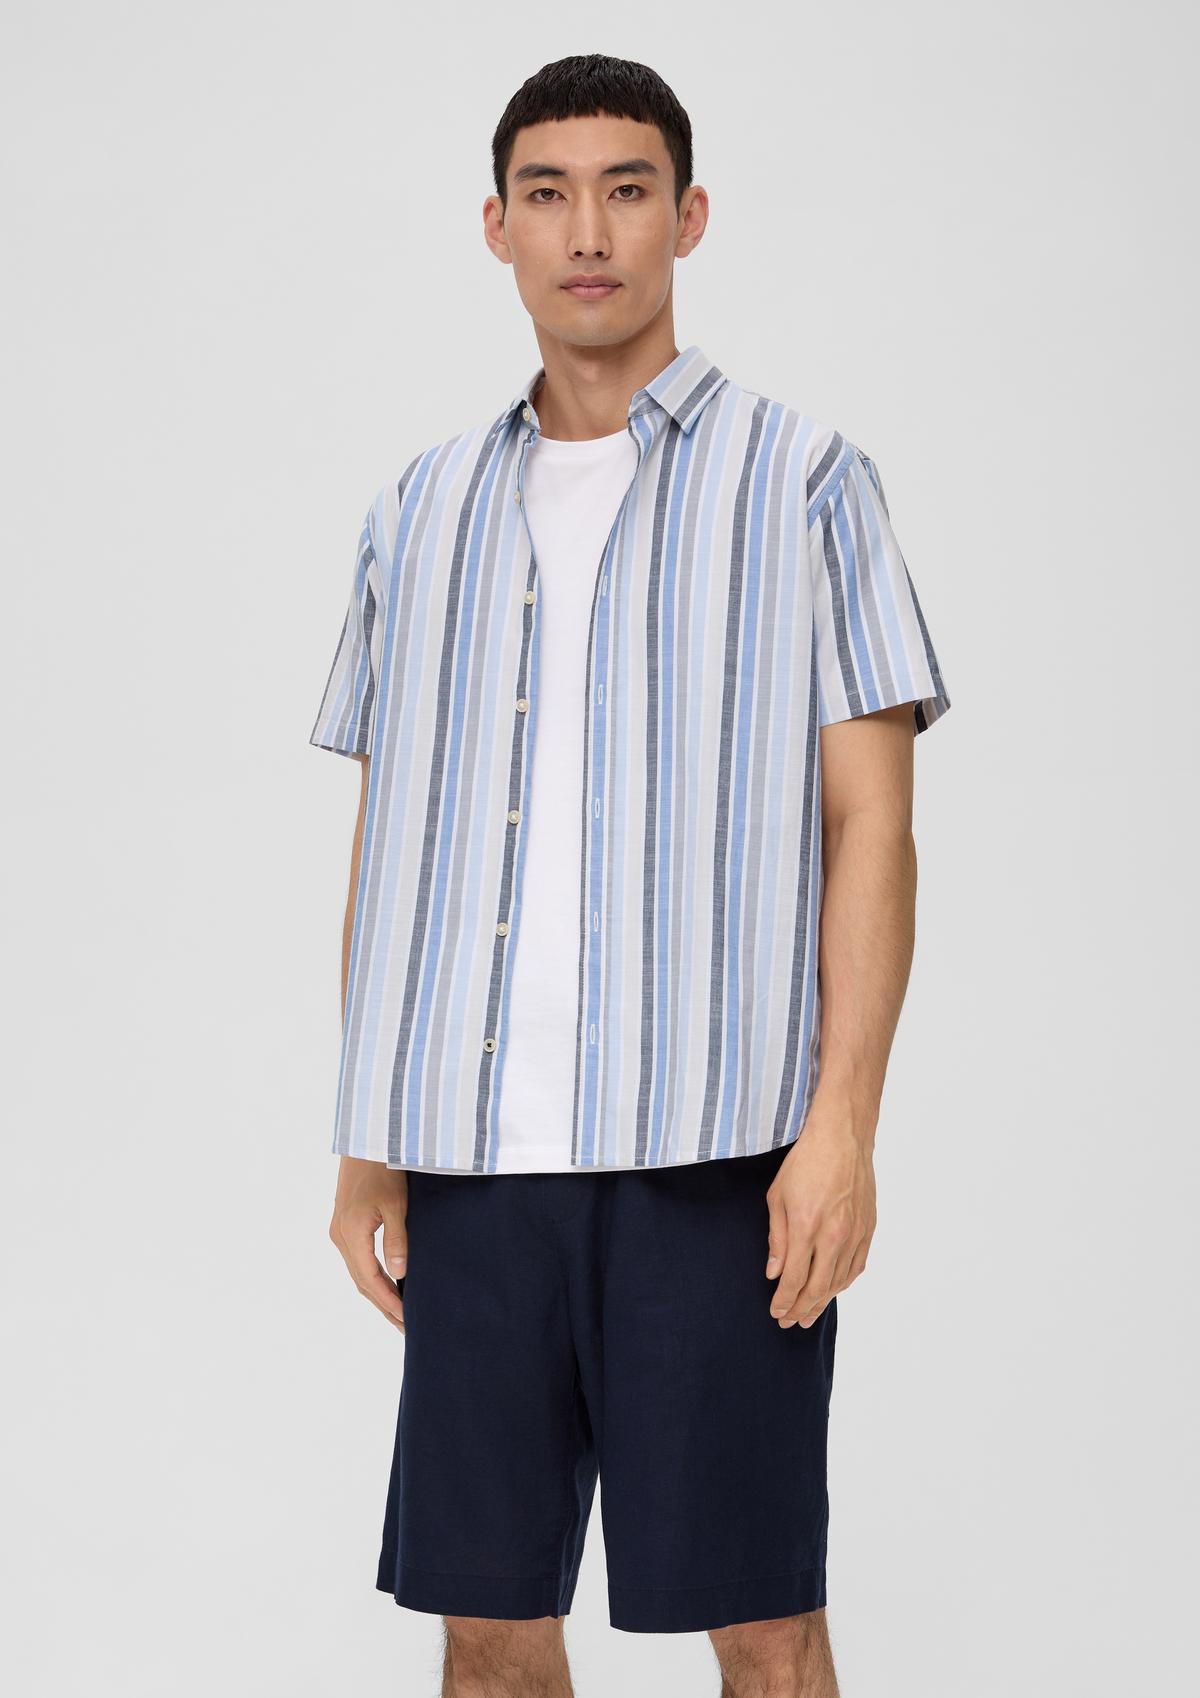 s.Oliver Short-sleeved shirt made of pure cotton